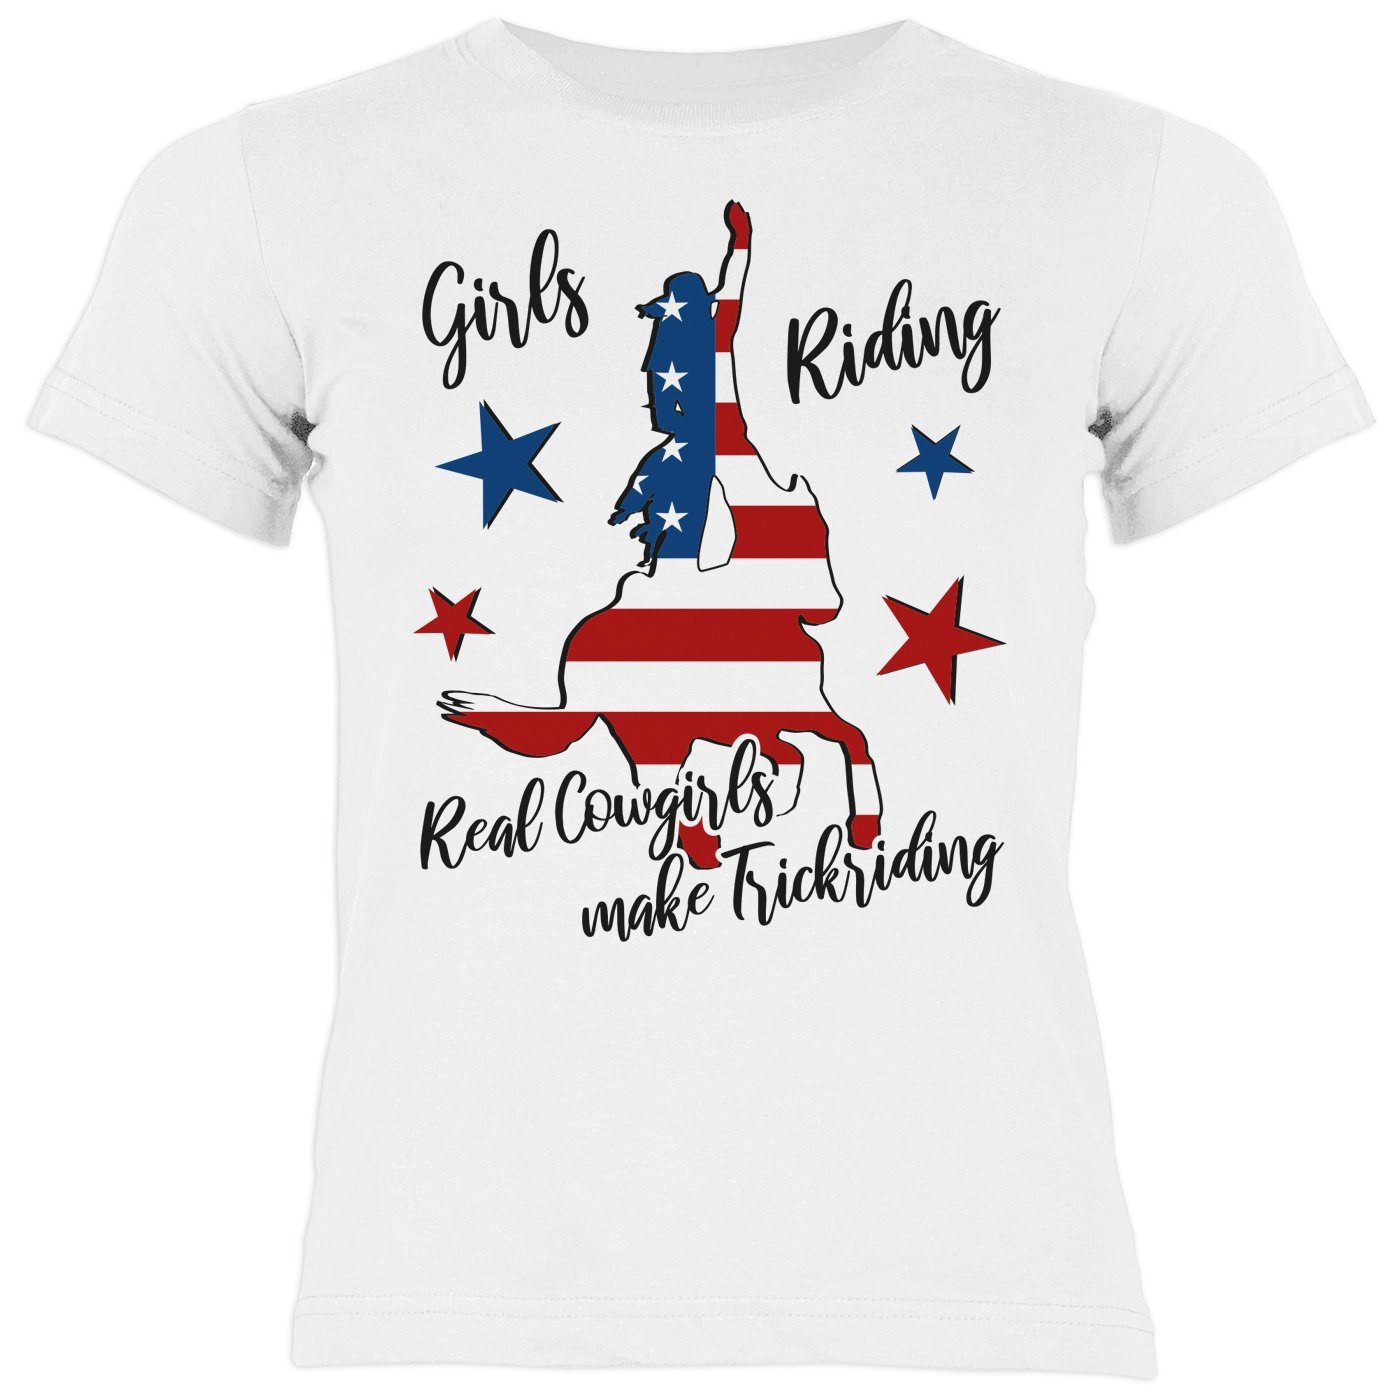 Shirts Riding Cowgirls Cowgirl Trickreiter Kindershirt T-Shirt Real Tini Trickriding Trickriding Shirt : Trickreiter T-Shirt make Girls Motiv Kinder -